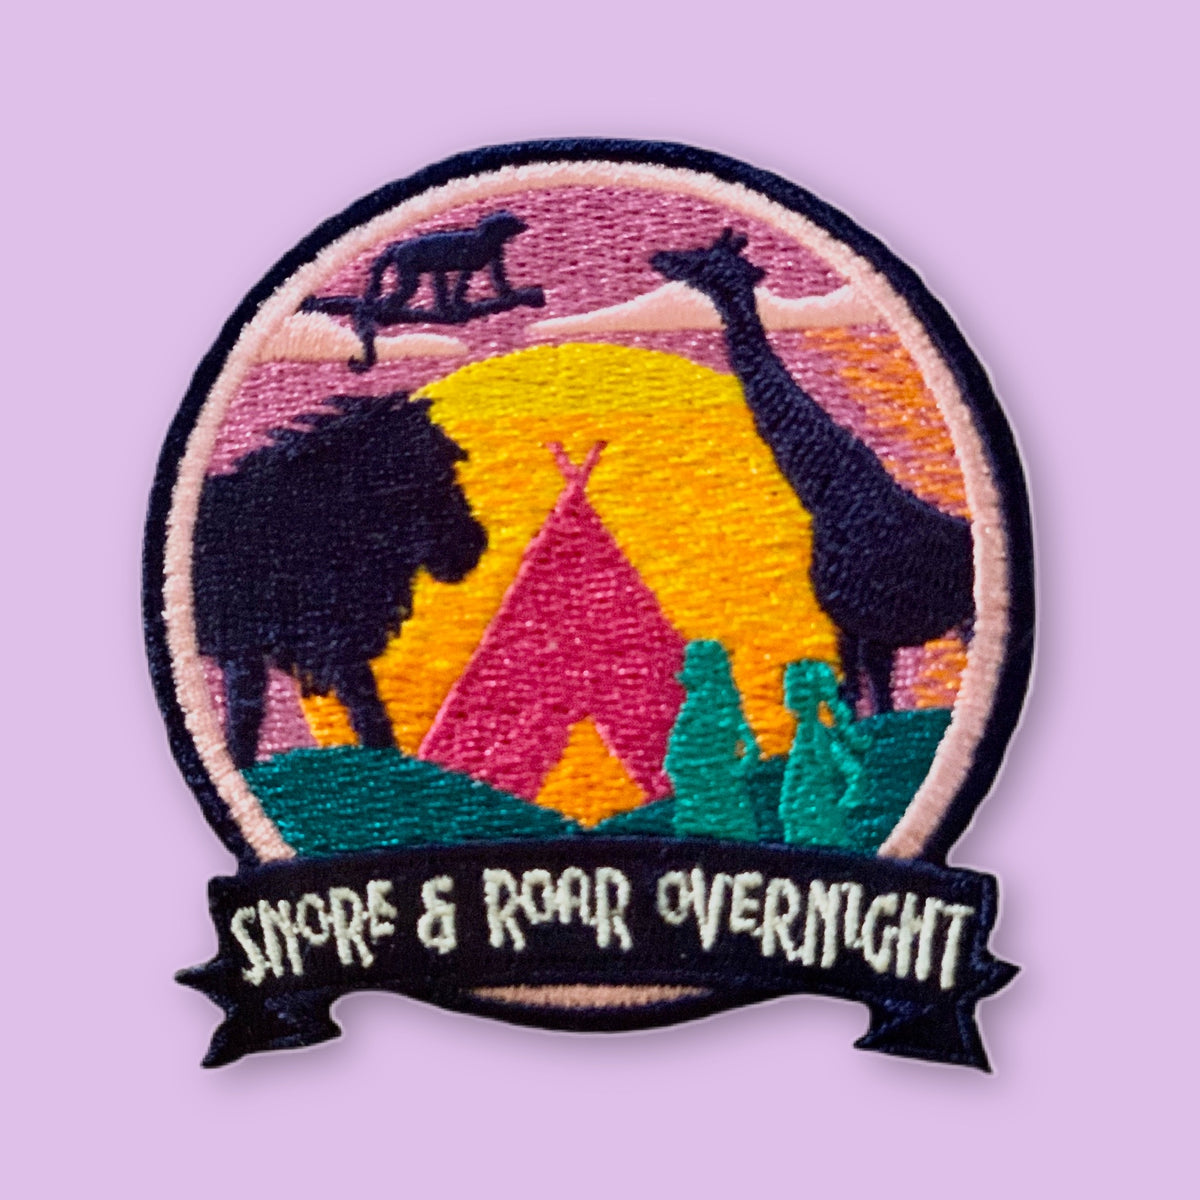 Overnight　About　–　Snore　and　Mad　Roar　Patch　Patches